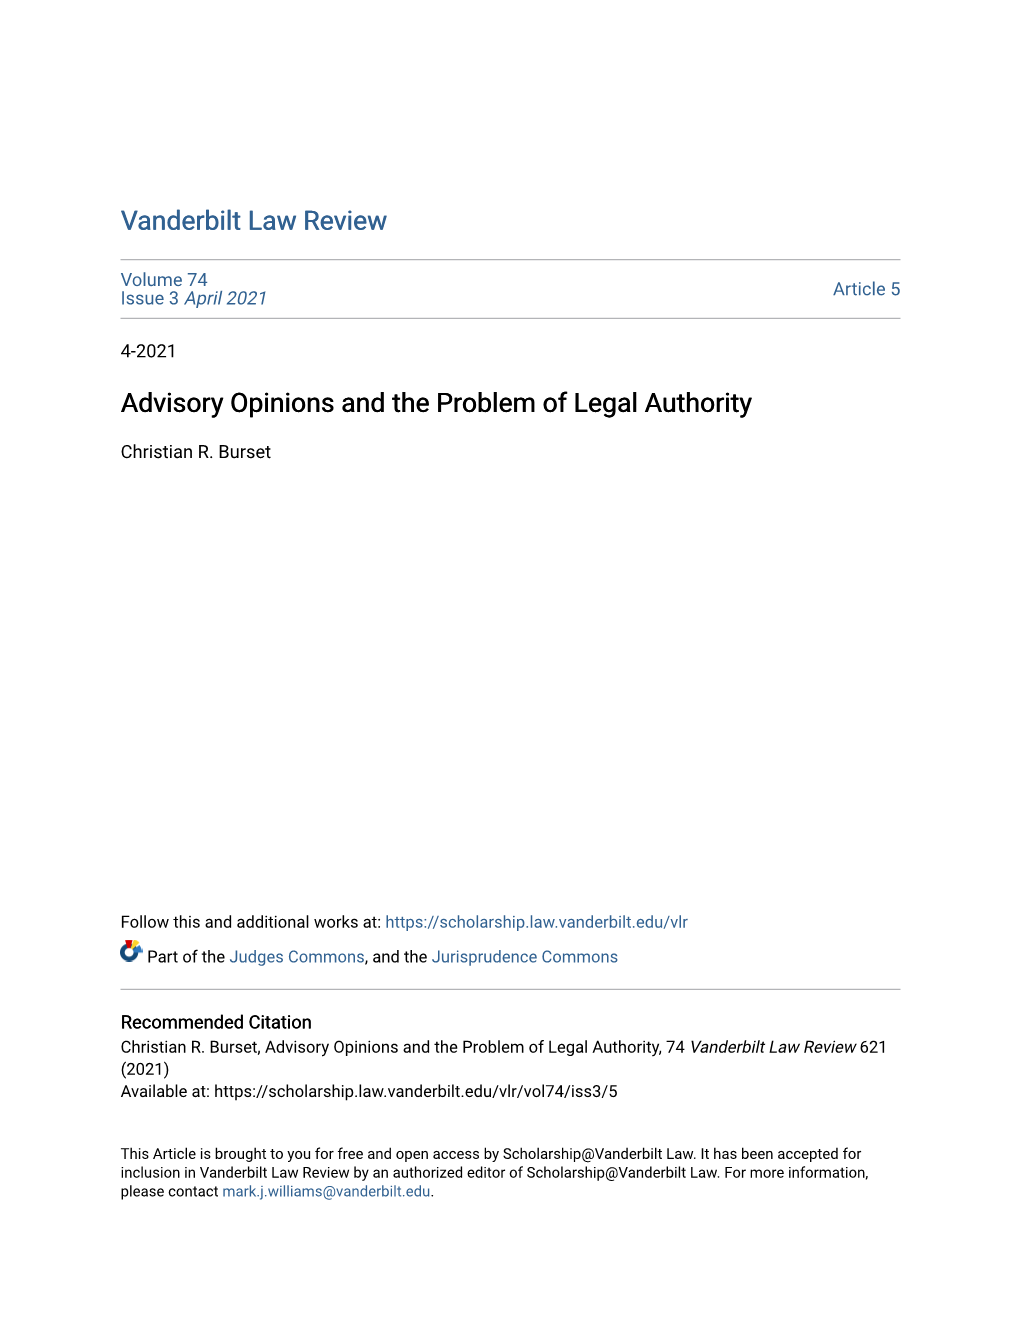 Advisory Opinions and the Problem of Legal Authority